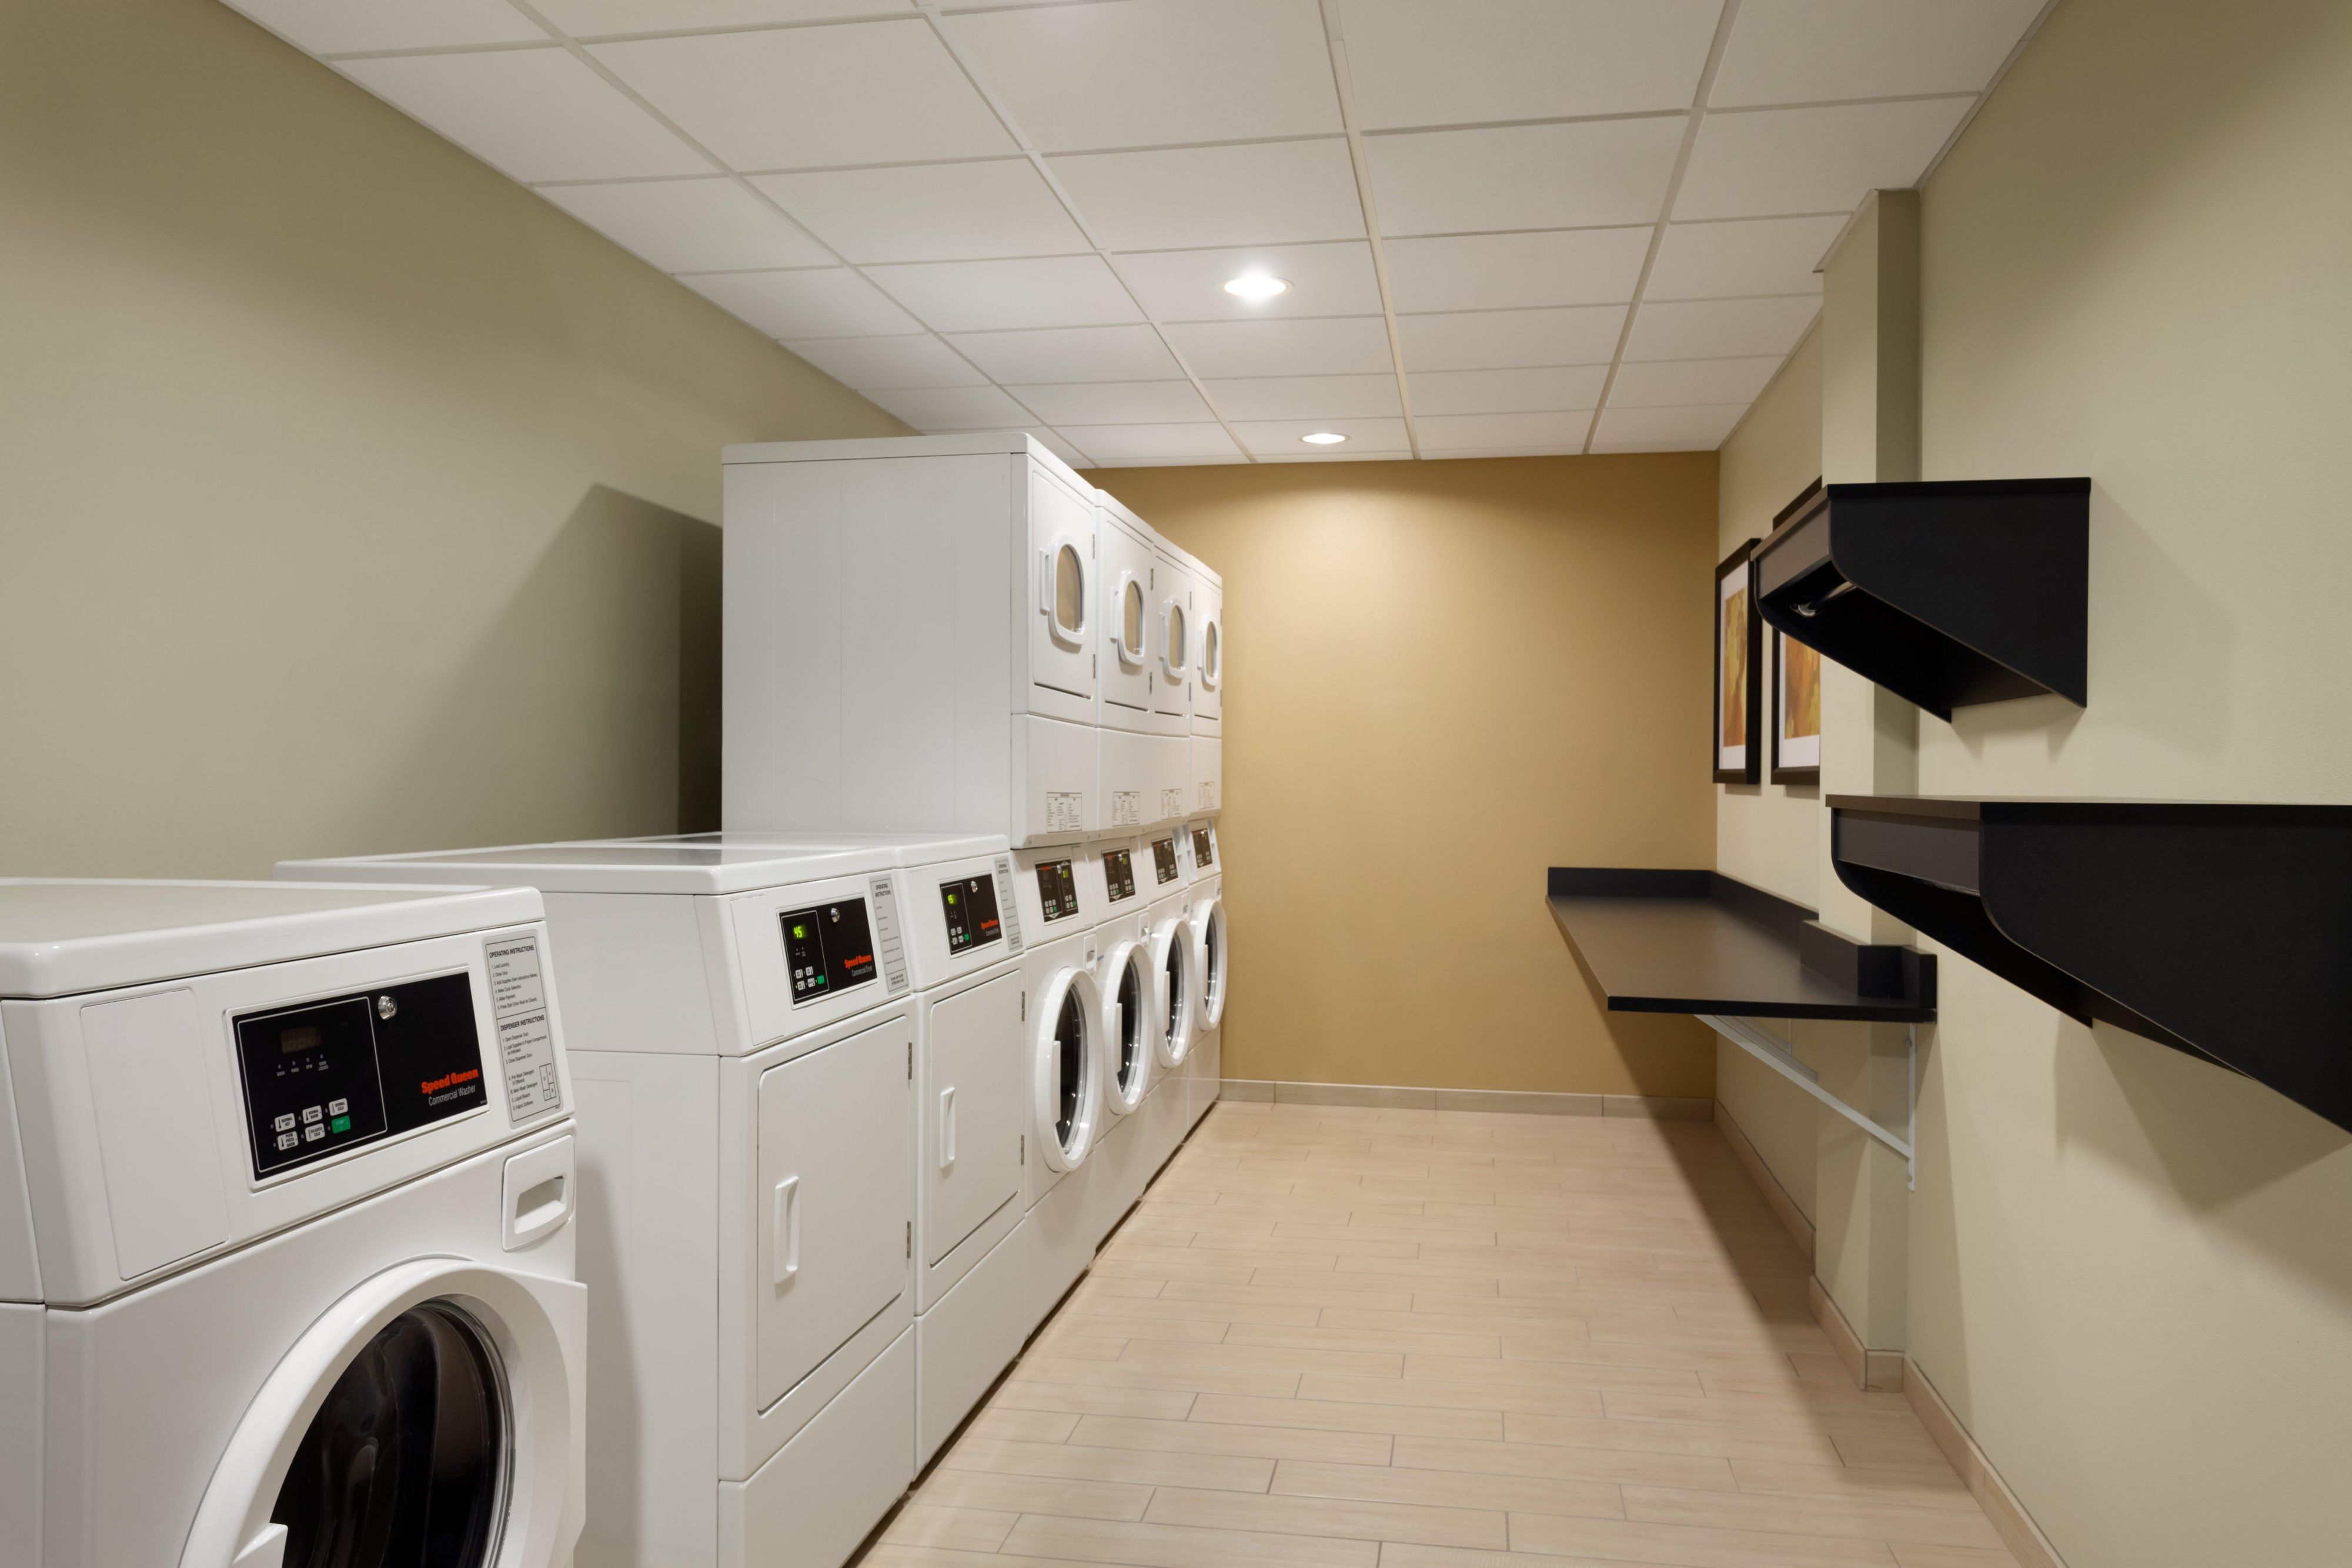 Simplify your travel plans at our short or extended-stay hotel in Midland. Start your day in style with free toiletries and clothes fresh from our laundry facility.